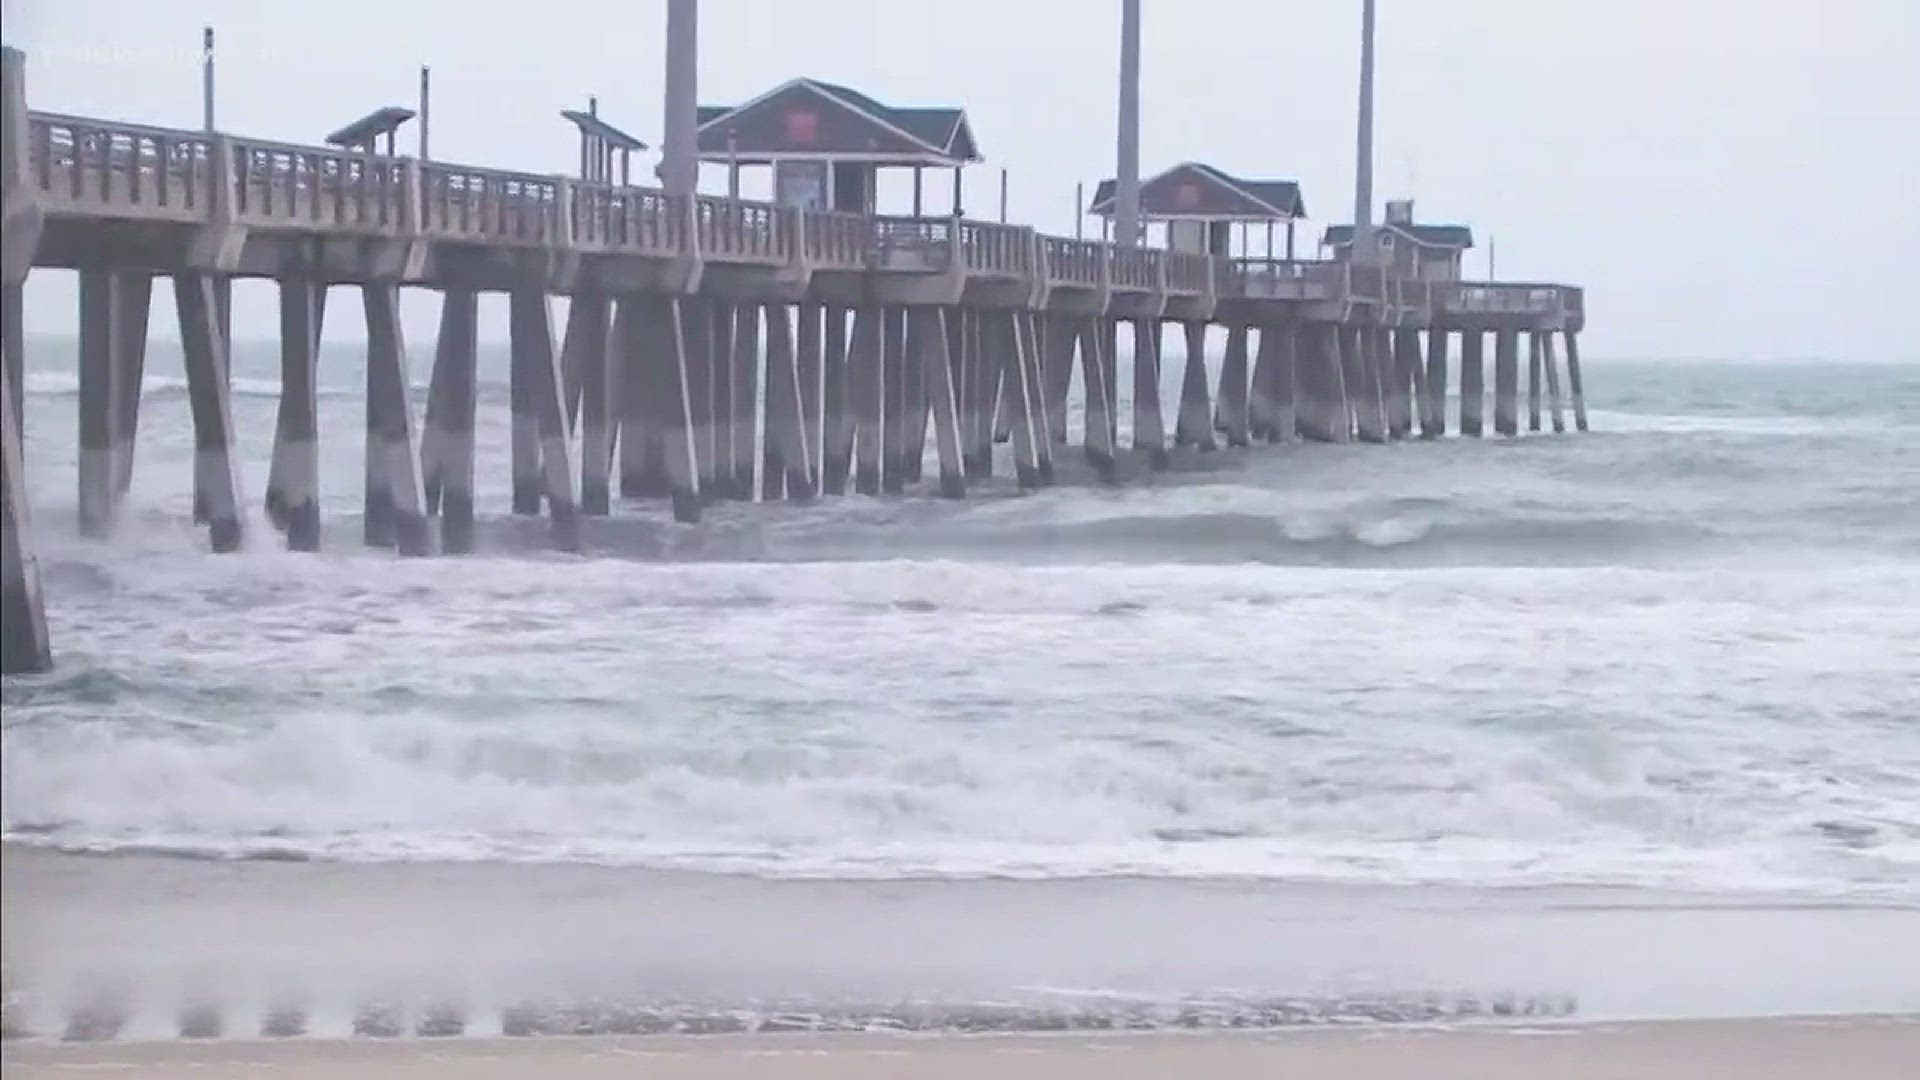 Outer Banks Officials will be lifting the evacuation order on Saturday.